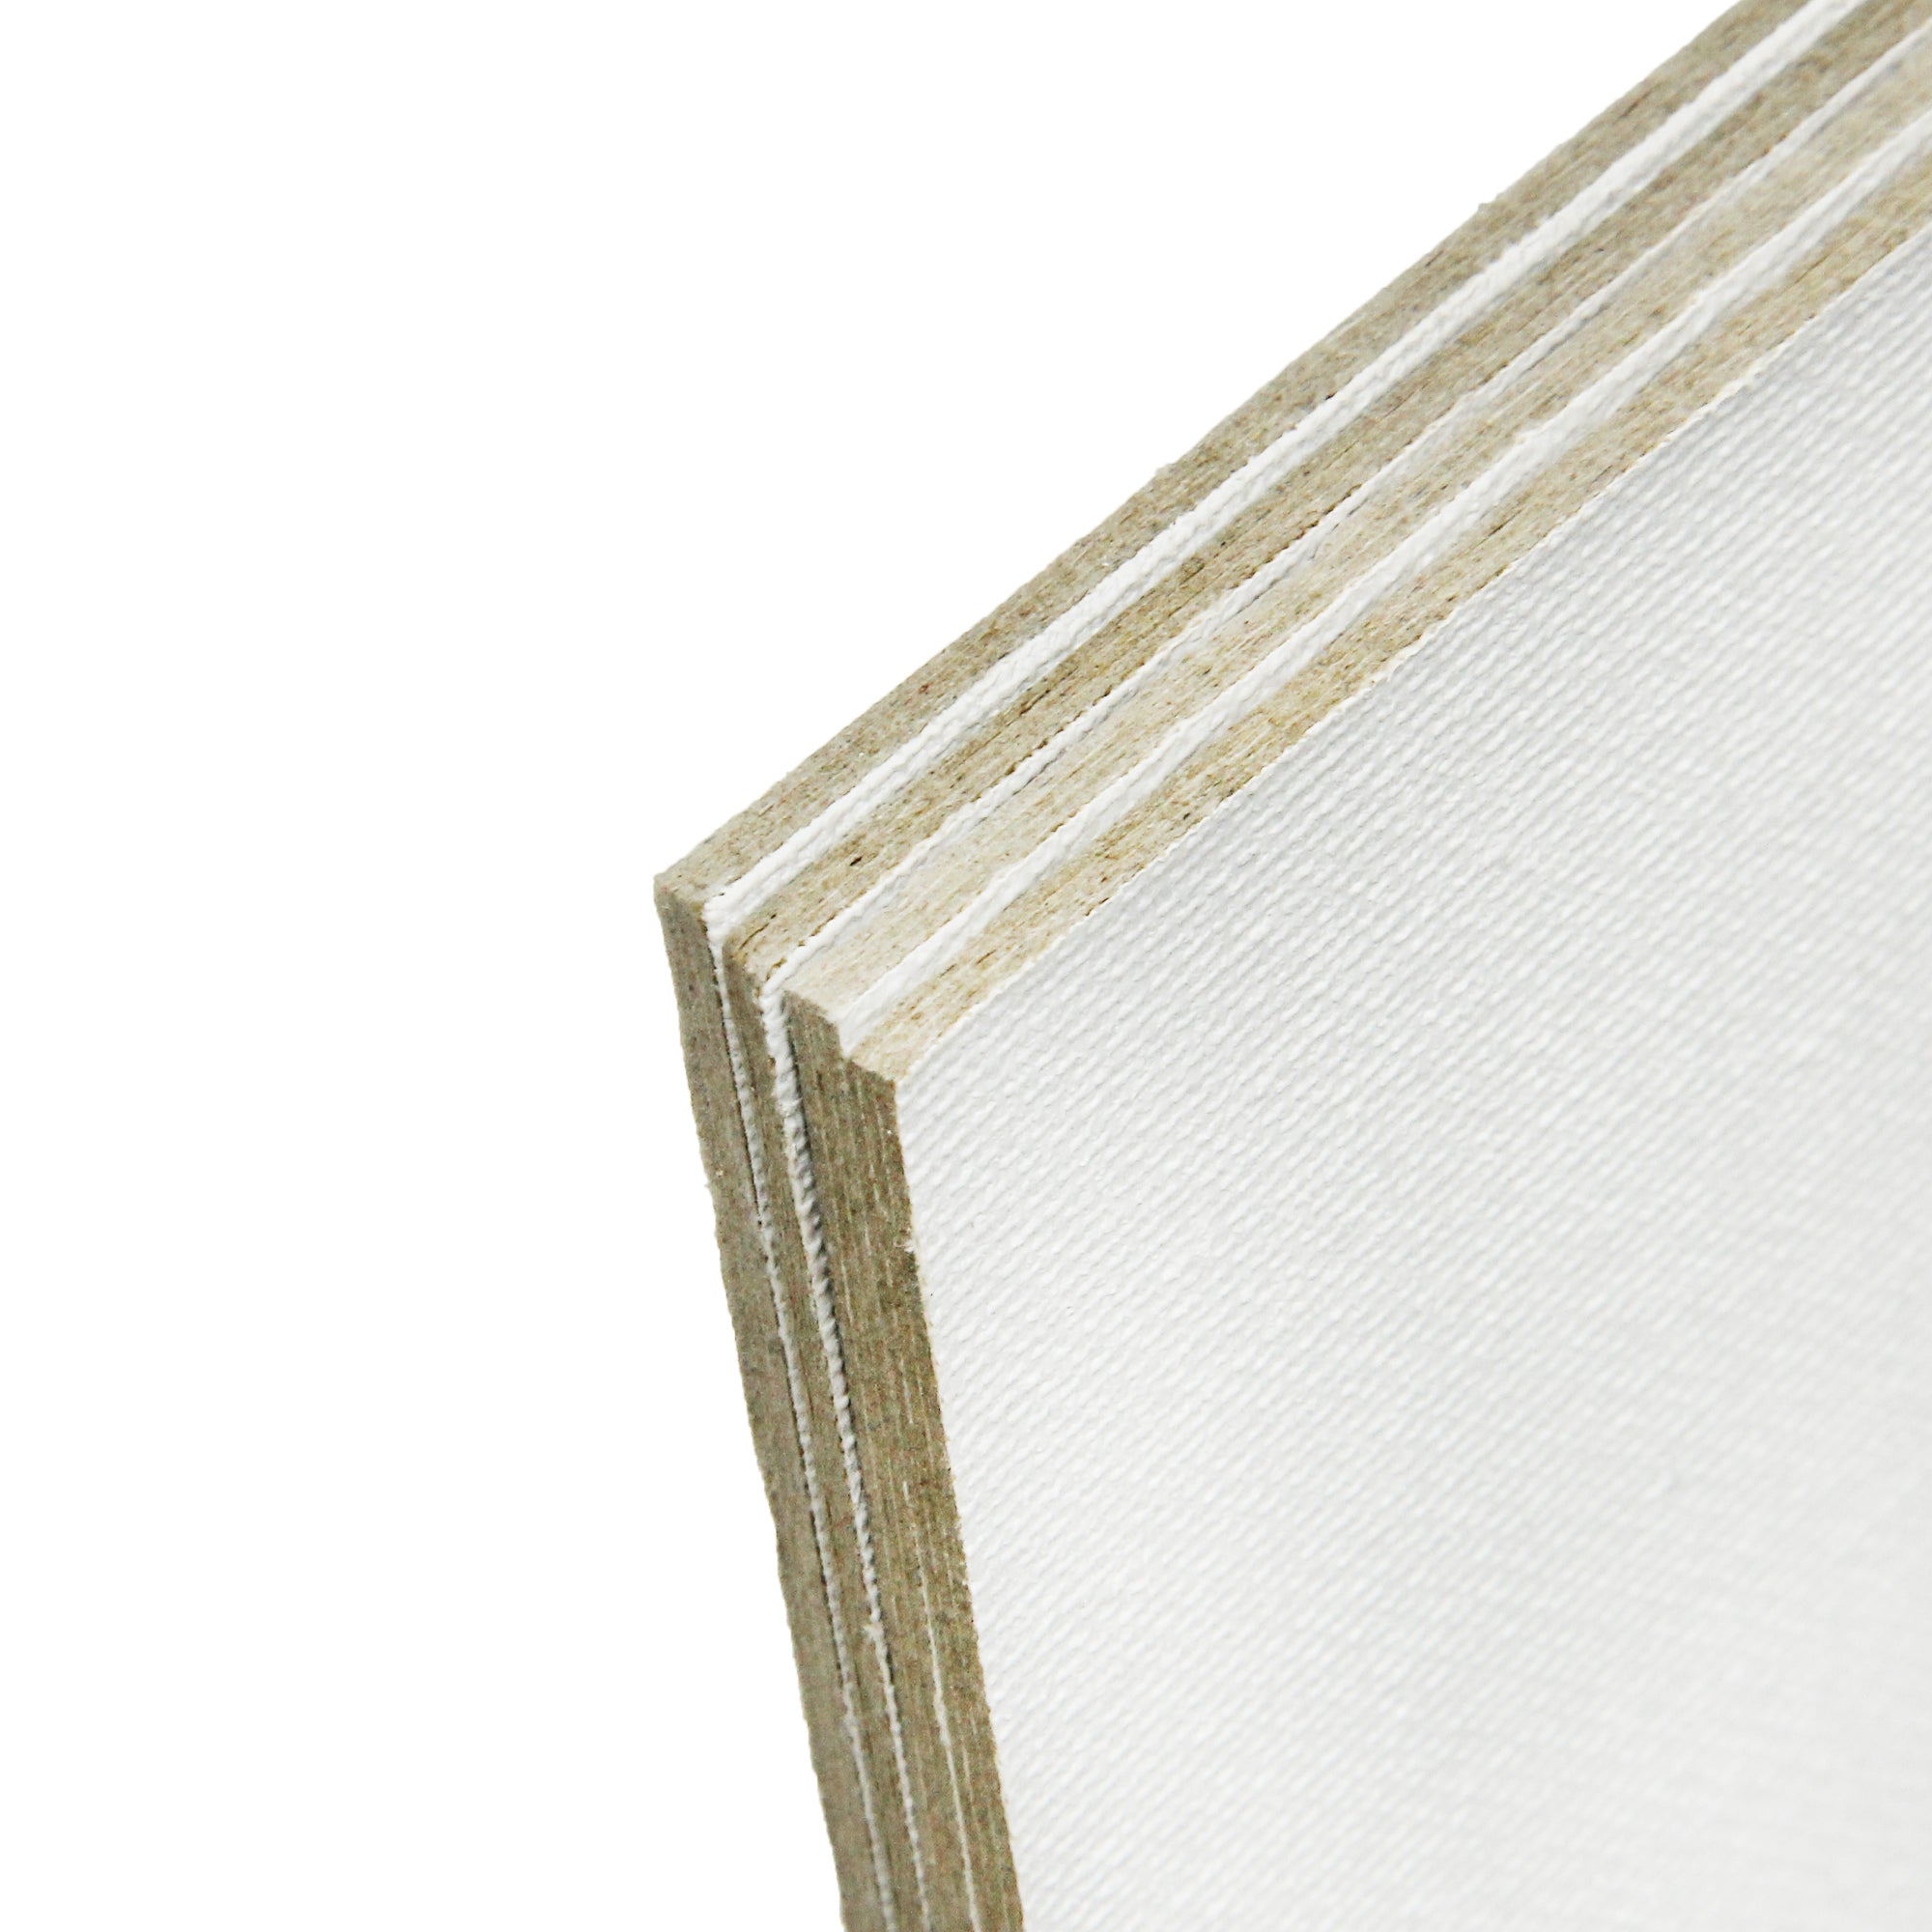 Canvas Board Rectangle 14 X 12Inch 230Gsm 2Mm Thick 4Pc Shrink Lb